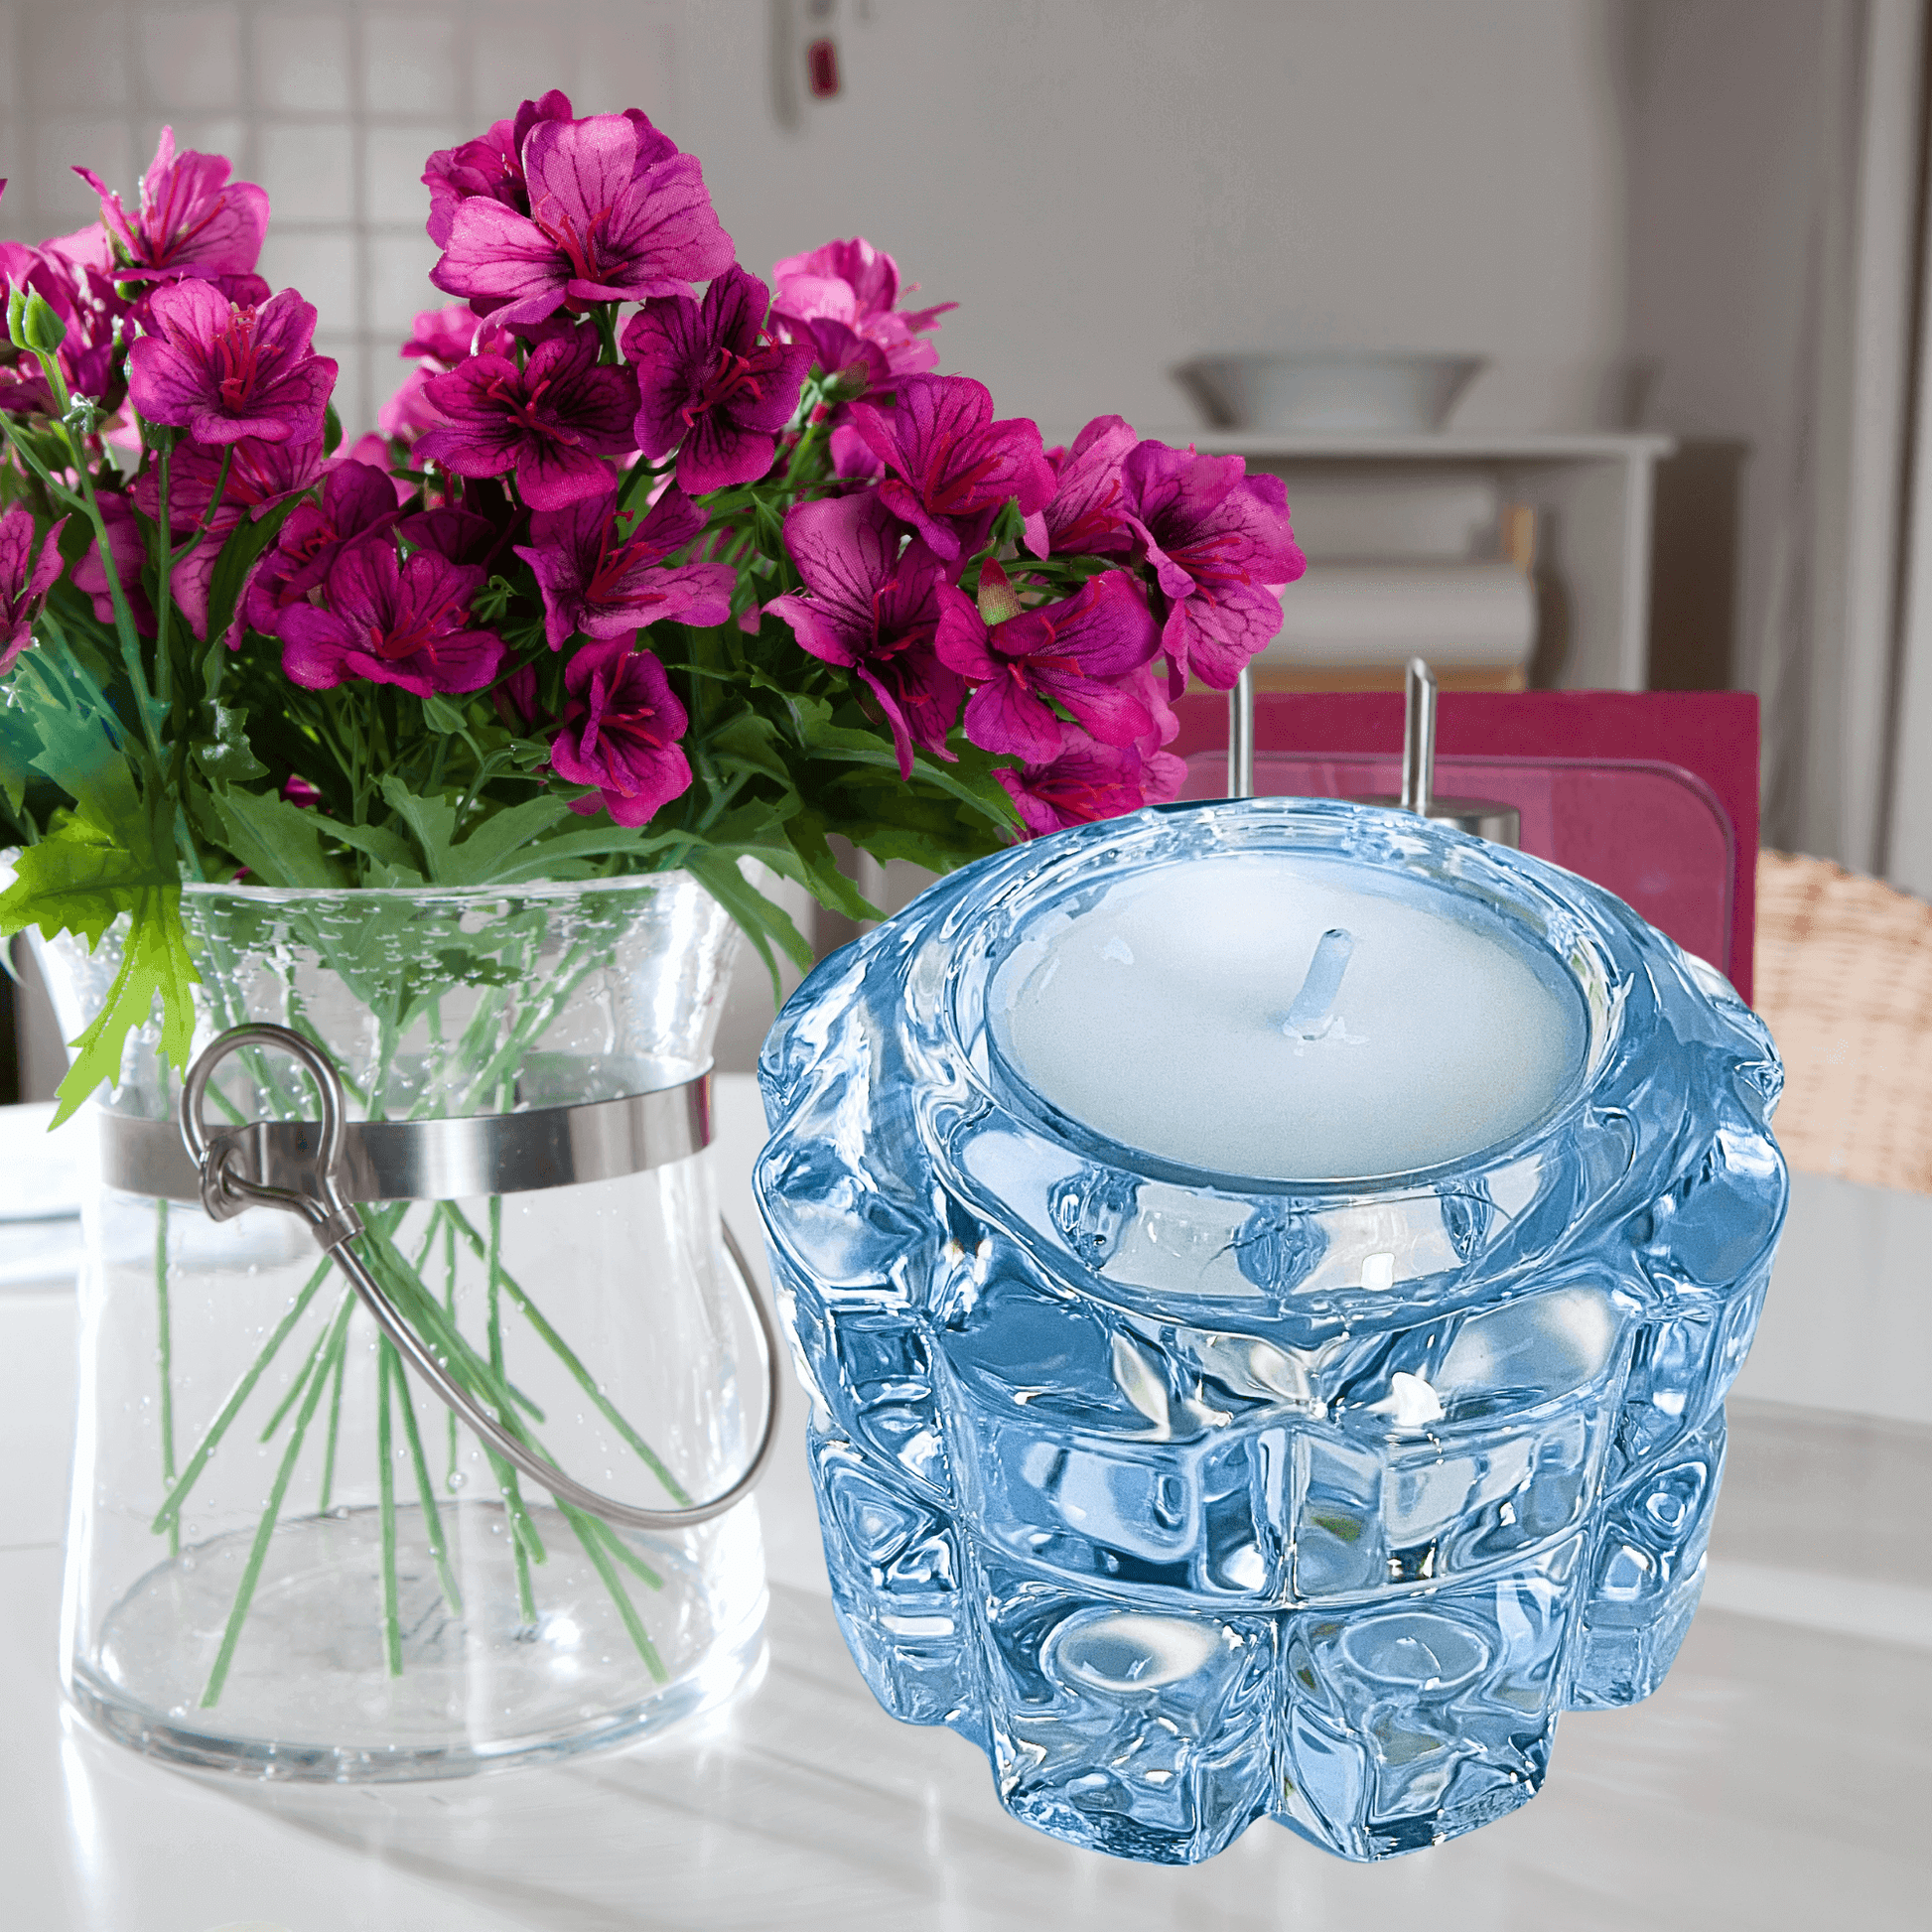 Vibrant pink petunias in a glass vase and a decorative crystal tealight holder on a table.